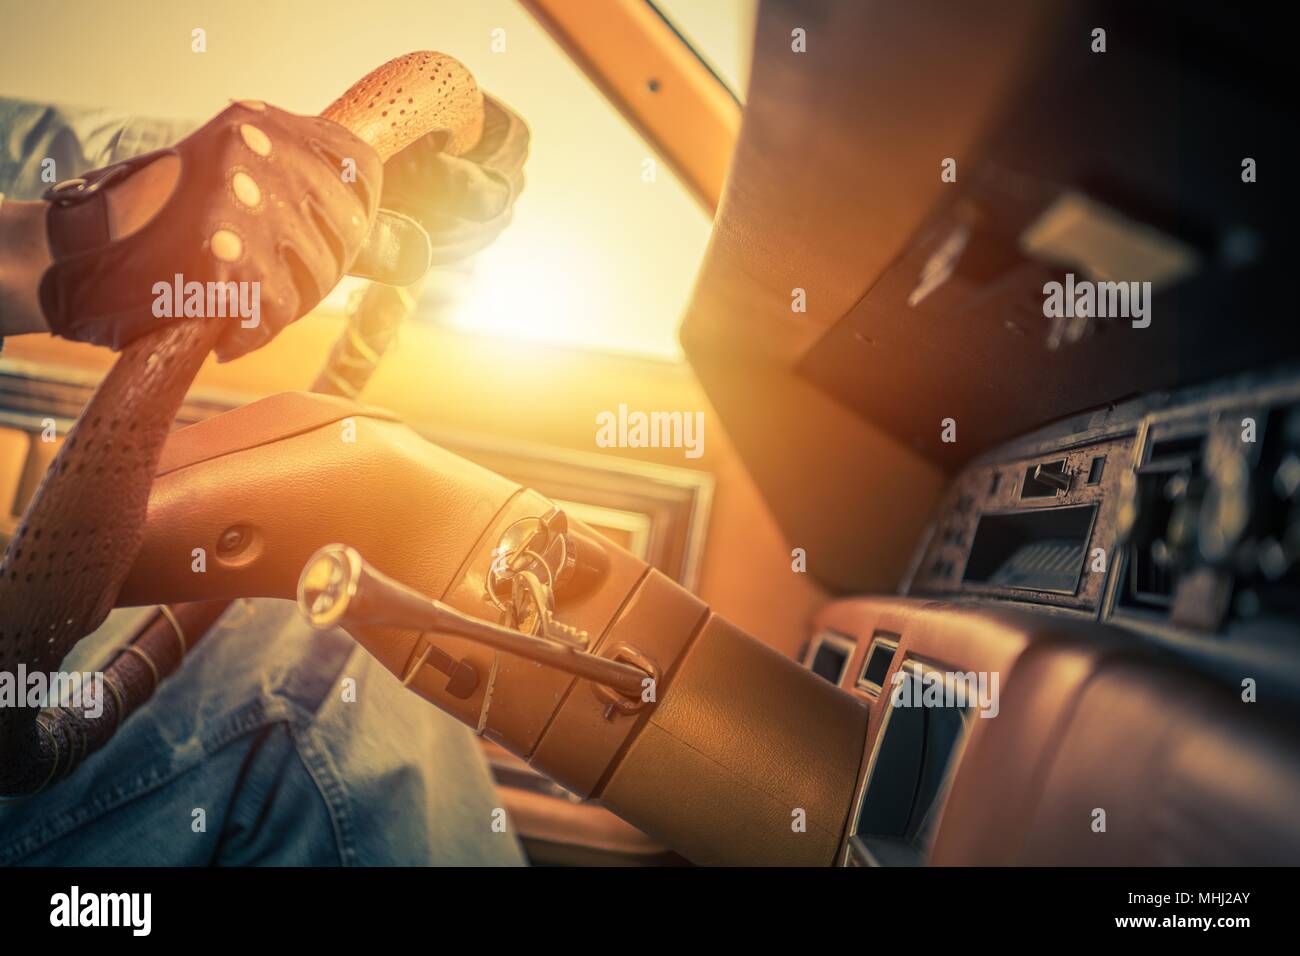 Retro Road Trip During Sunset. Classic Car Driving Theme. Stock Photo